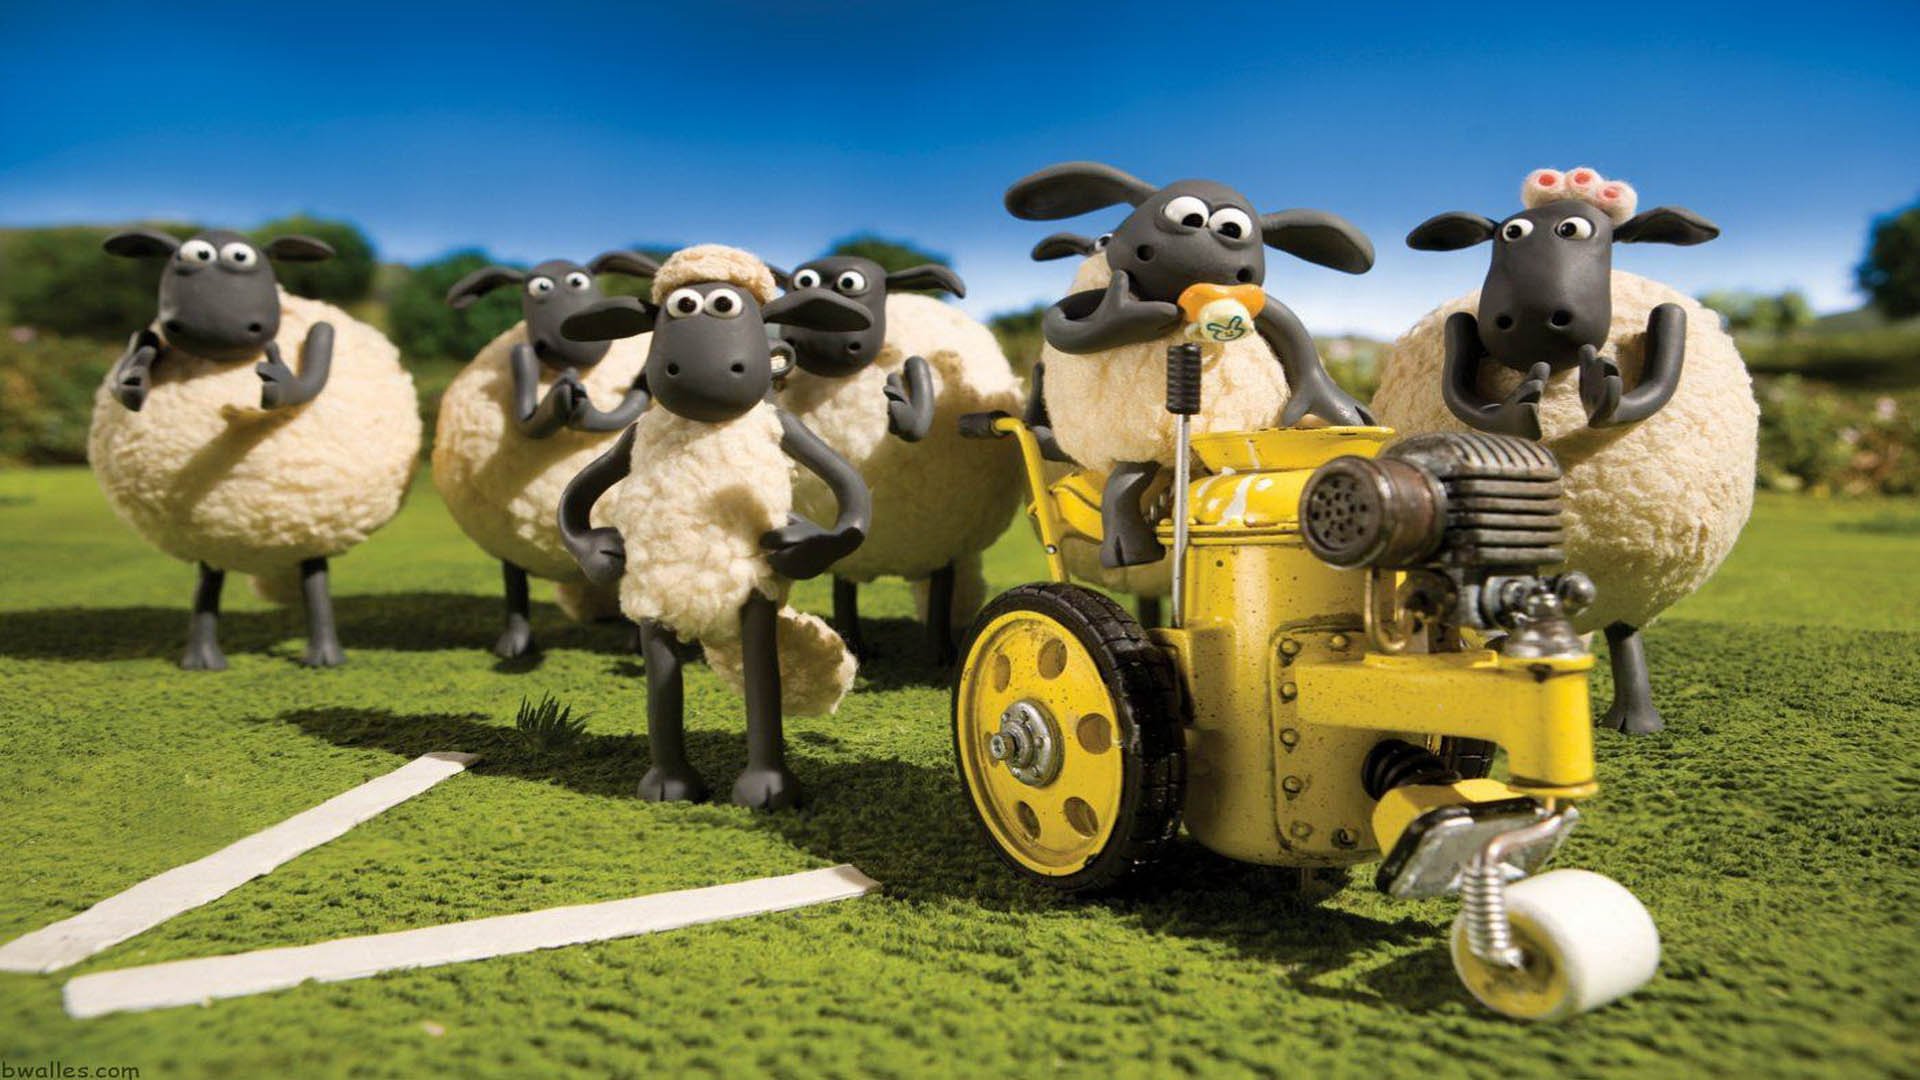 Shaun The Sheep Animation Family Comedy Shaun Sheep Adventure Wallpapers Hd Desktop And Mobile Backgrounds